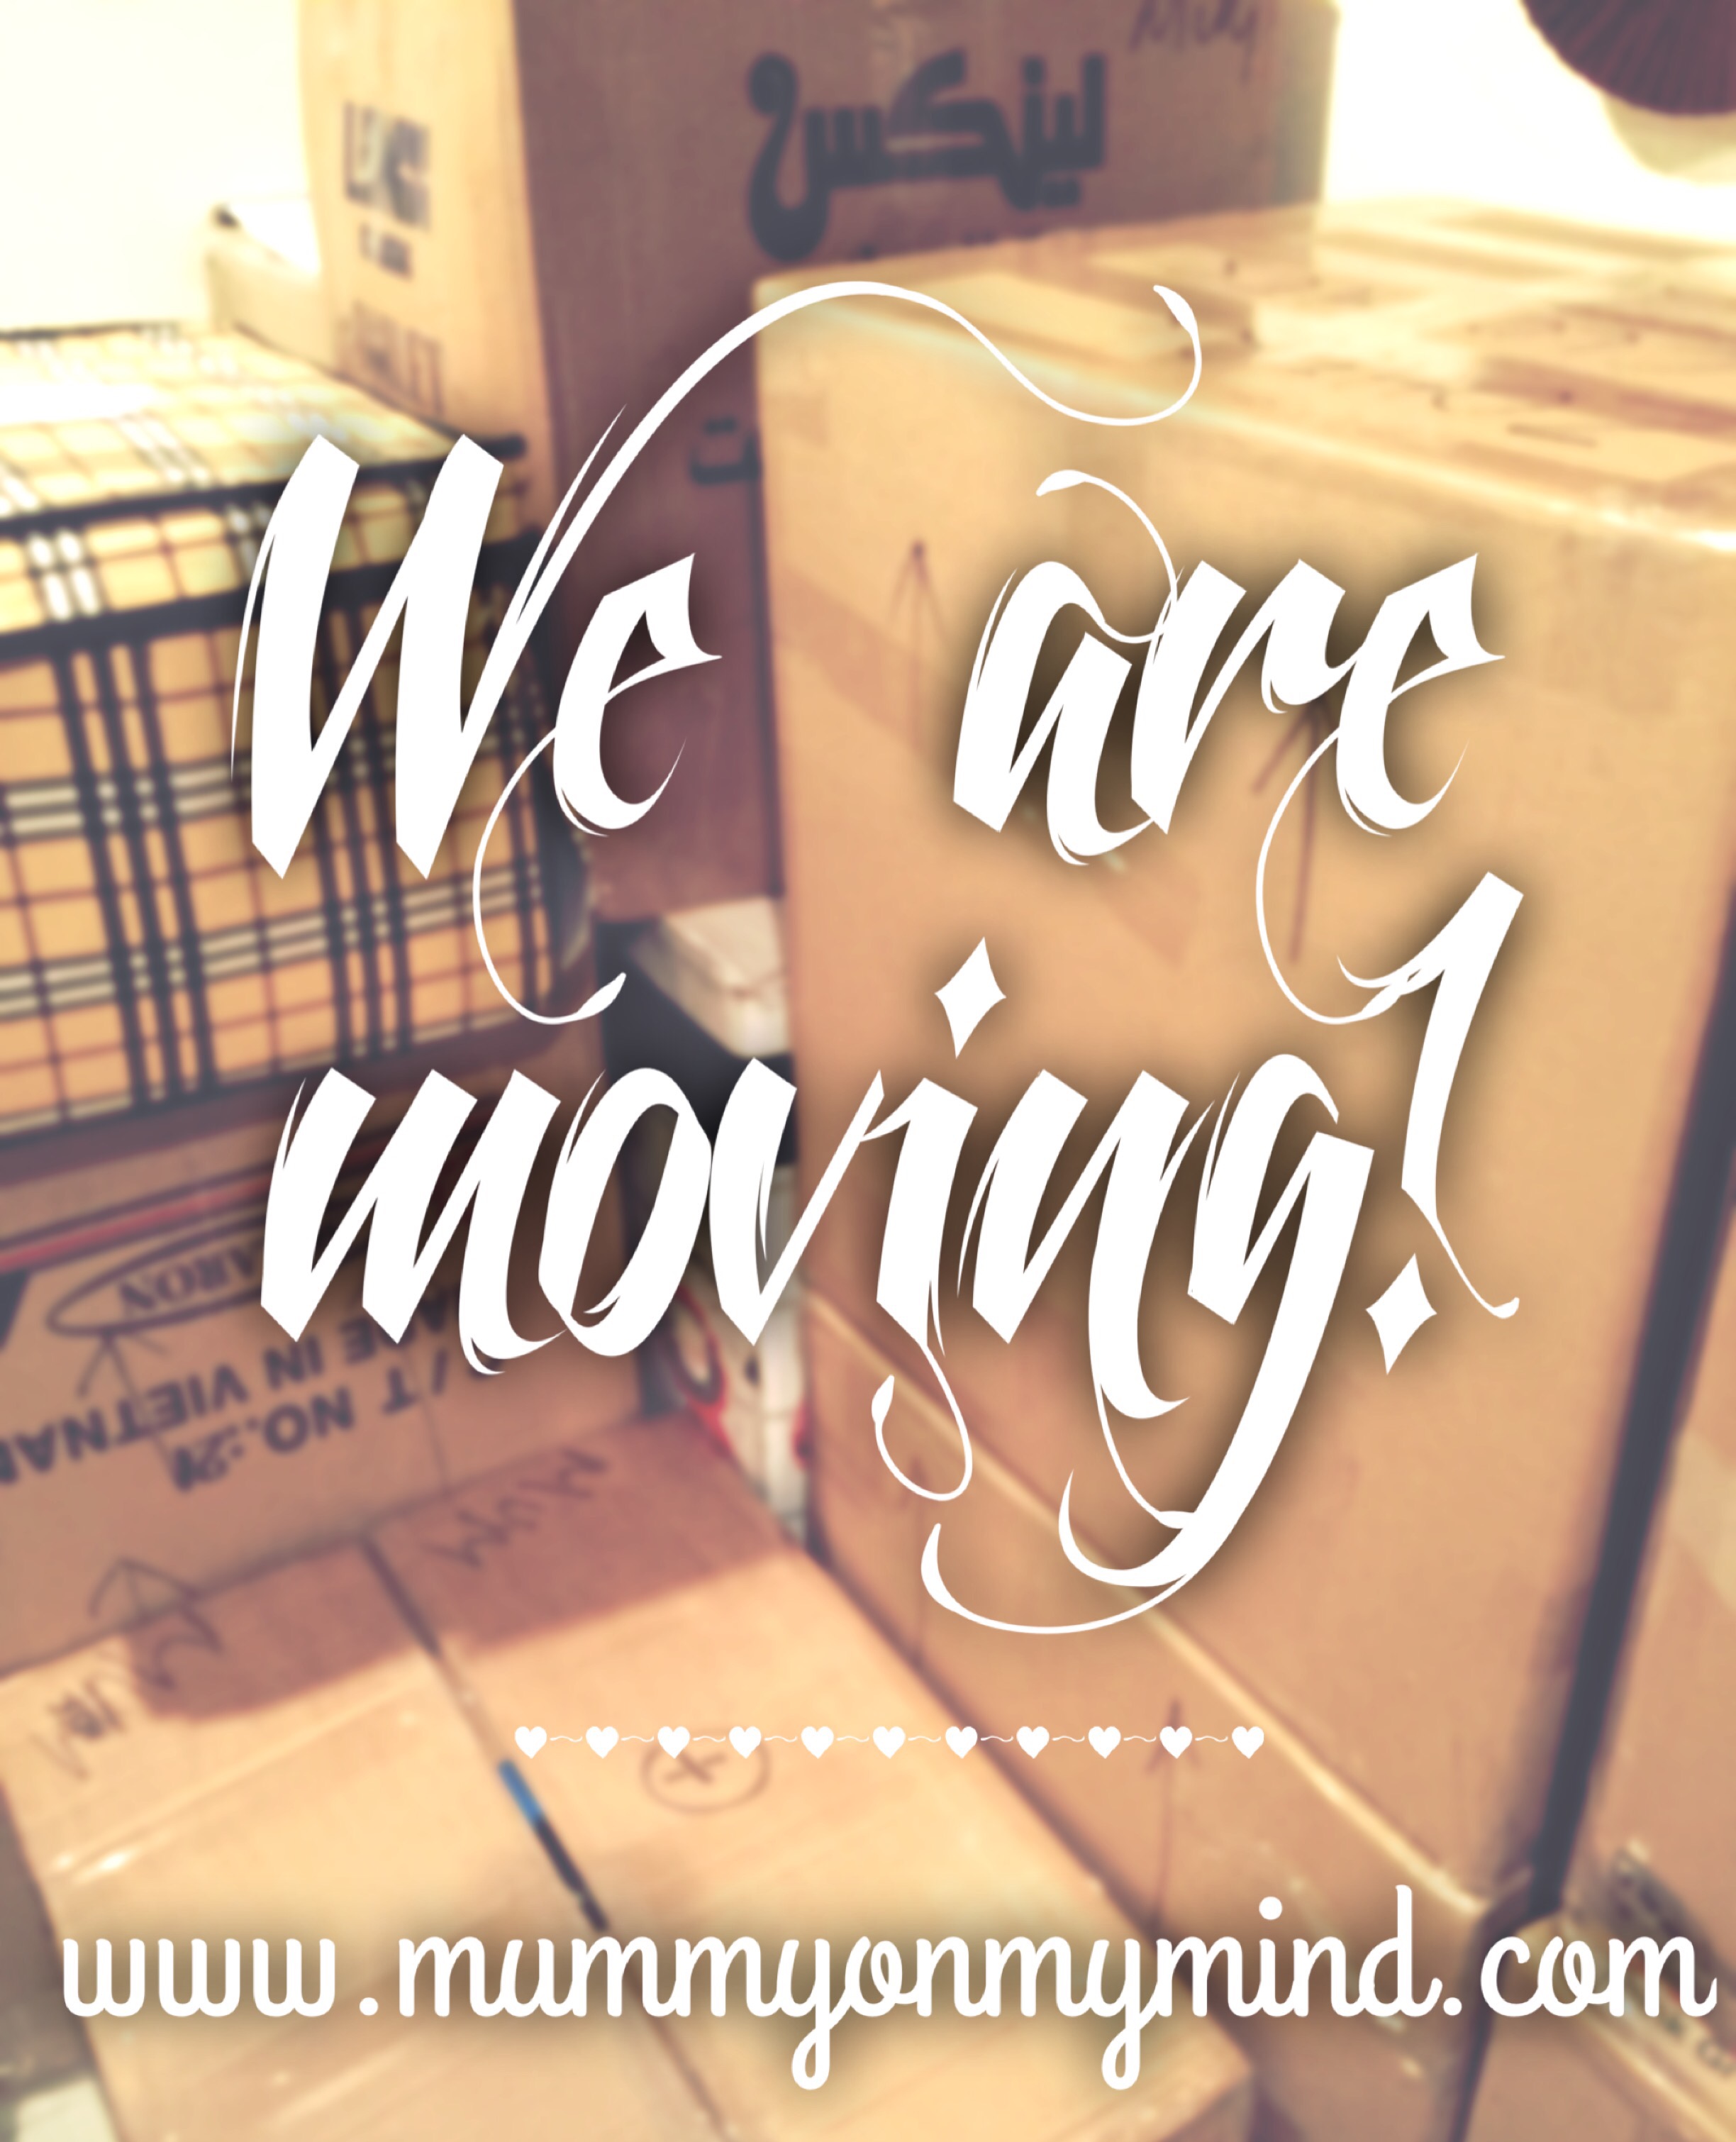 We are Moving…